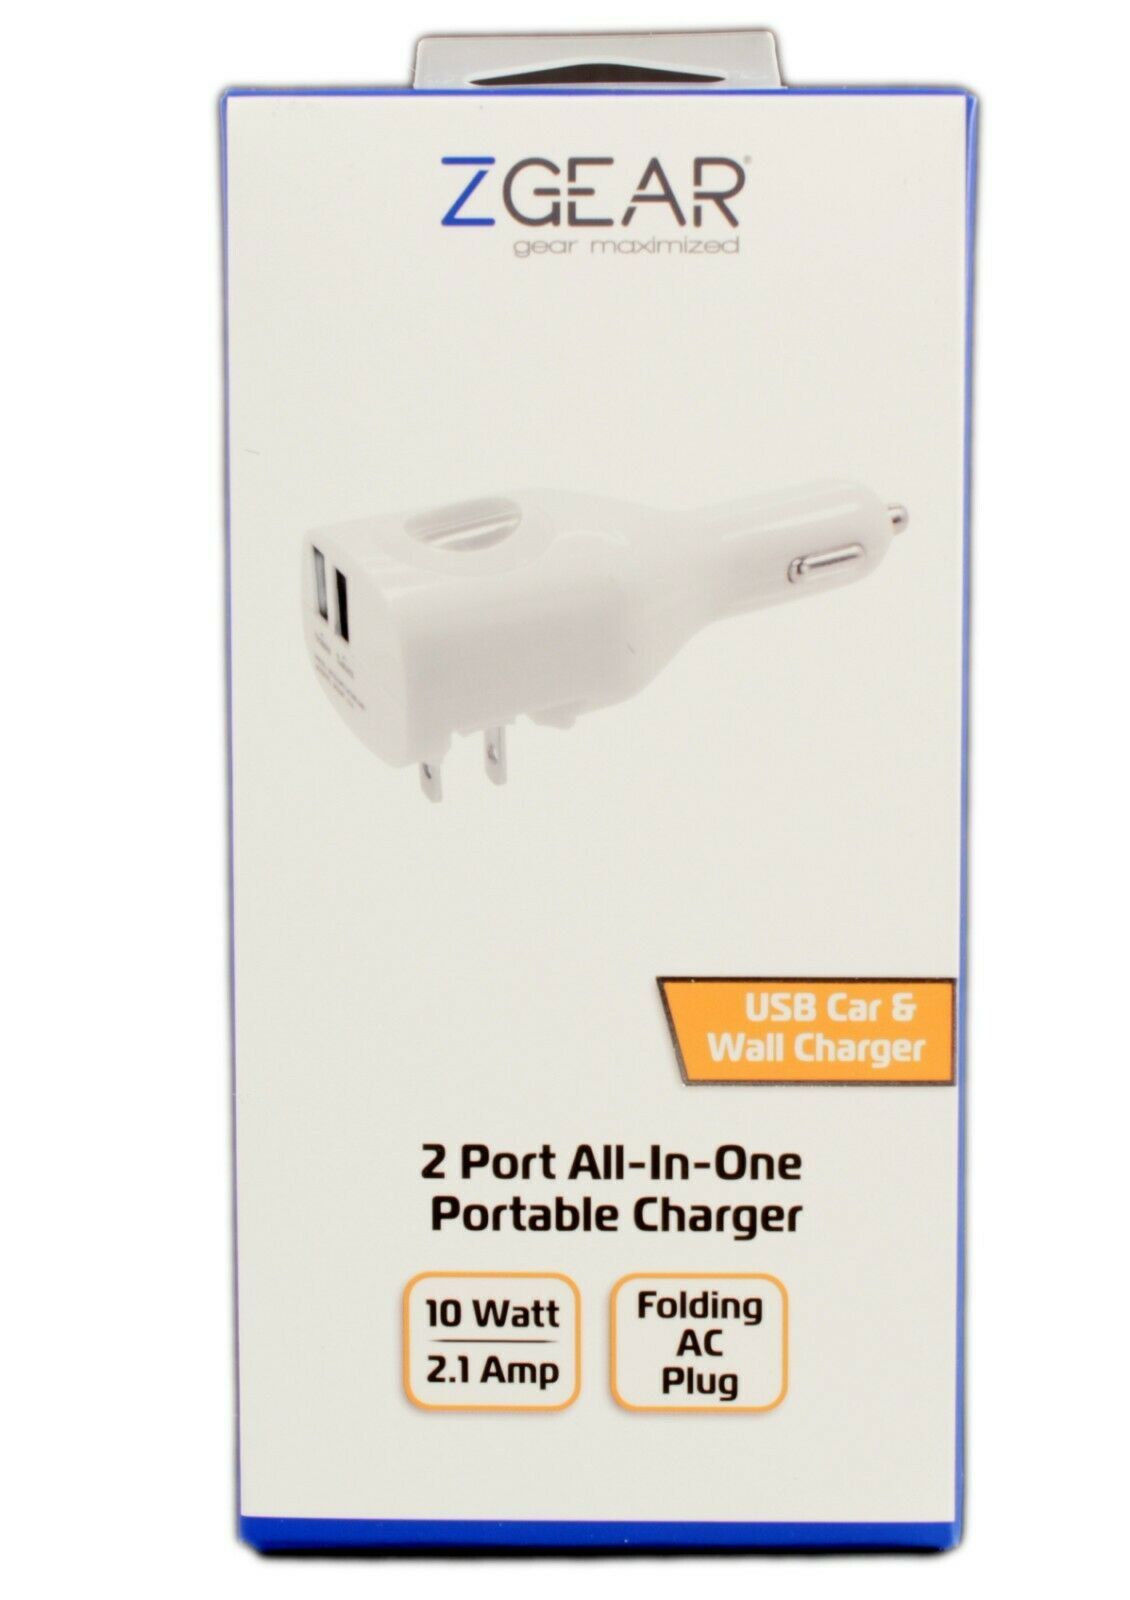 Primary image for Zgear 2 Port Portable Charger USB Car and Wall Charger w Folding AC Plug